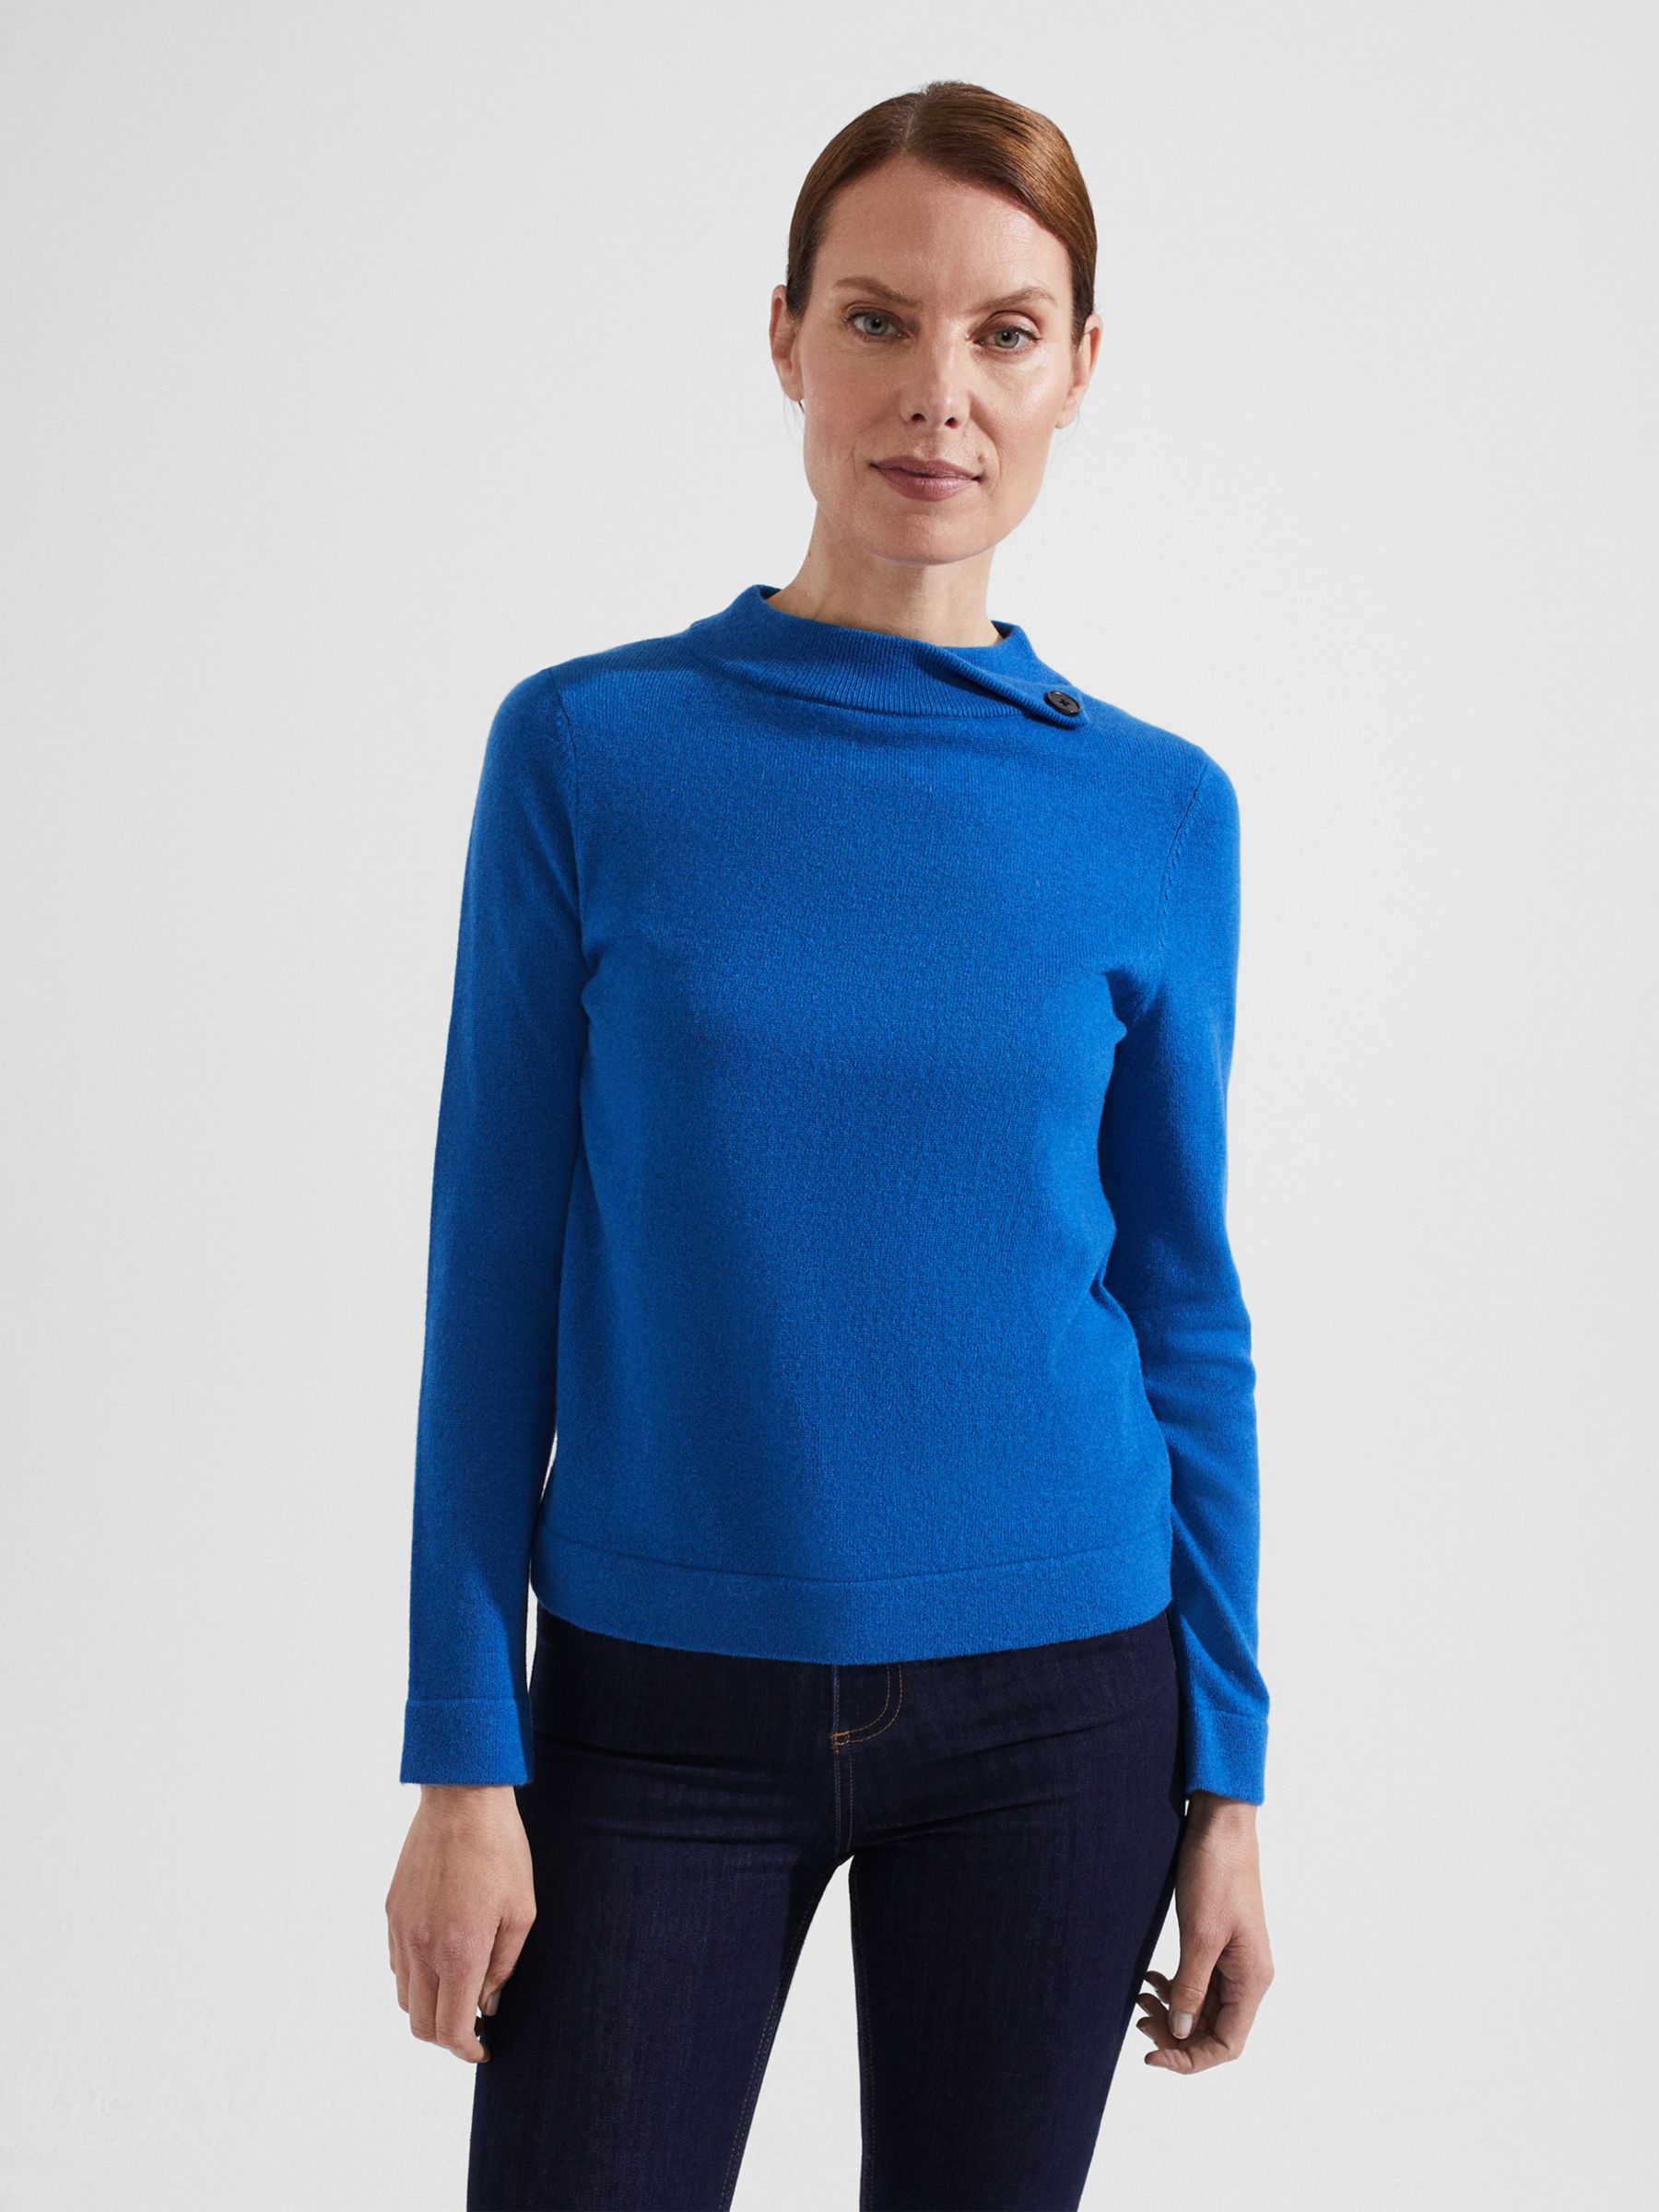 Hobbs Audrey Cashmere and Wool Jumper, Pink Marl at John Lewis